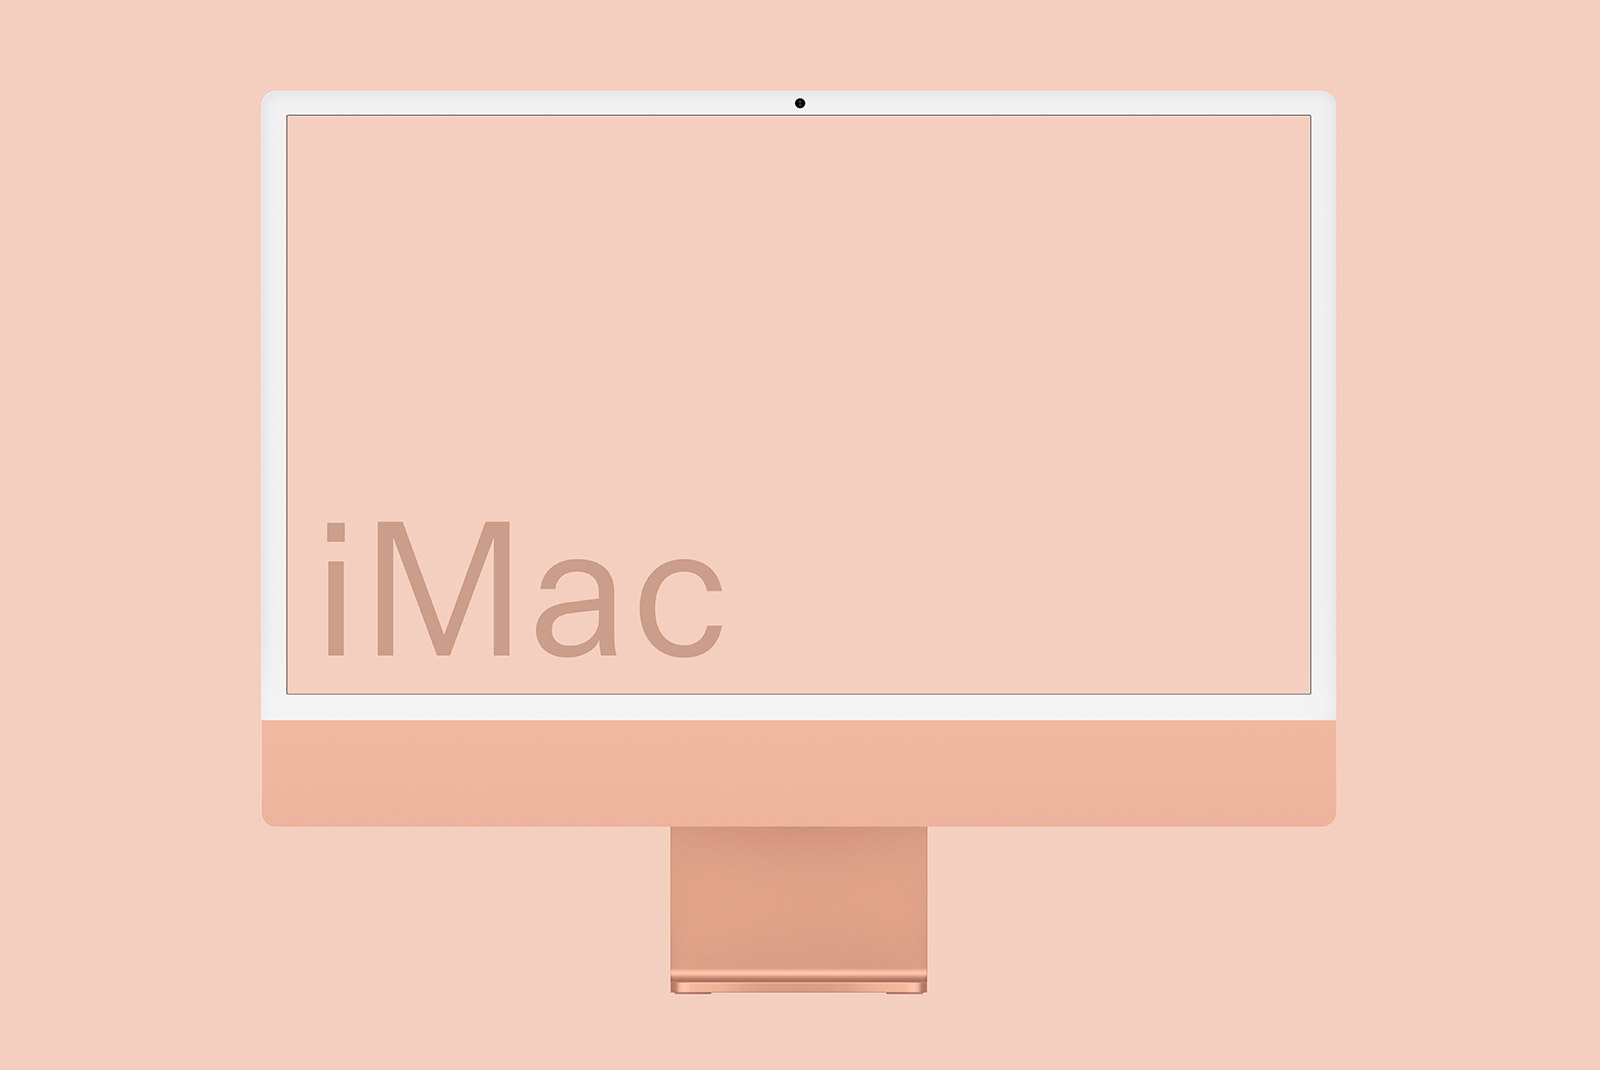 Minimalist peach-colored desktop computer mockup on a solid background, ideal for showcasing digital designs and user interface templates.